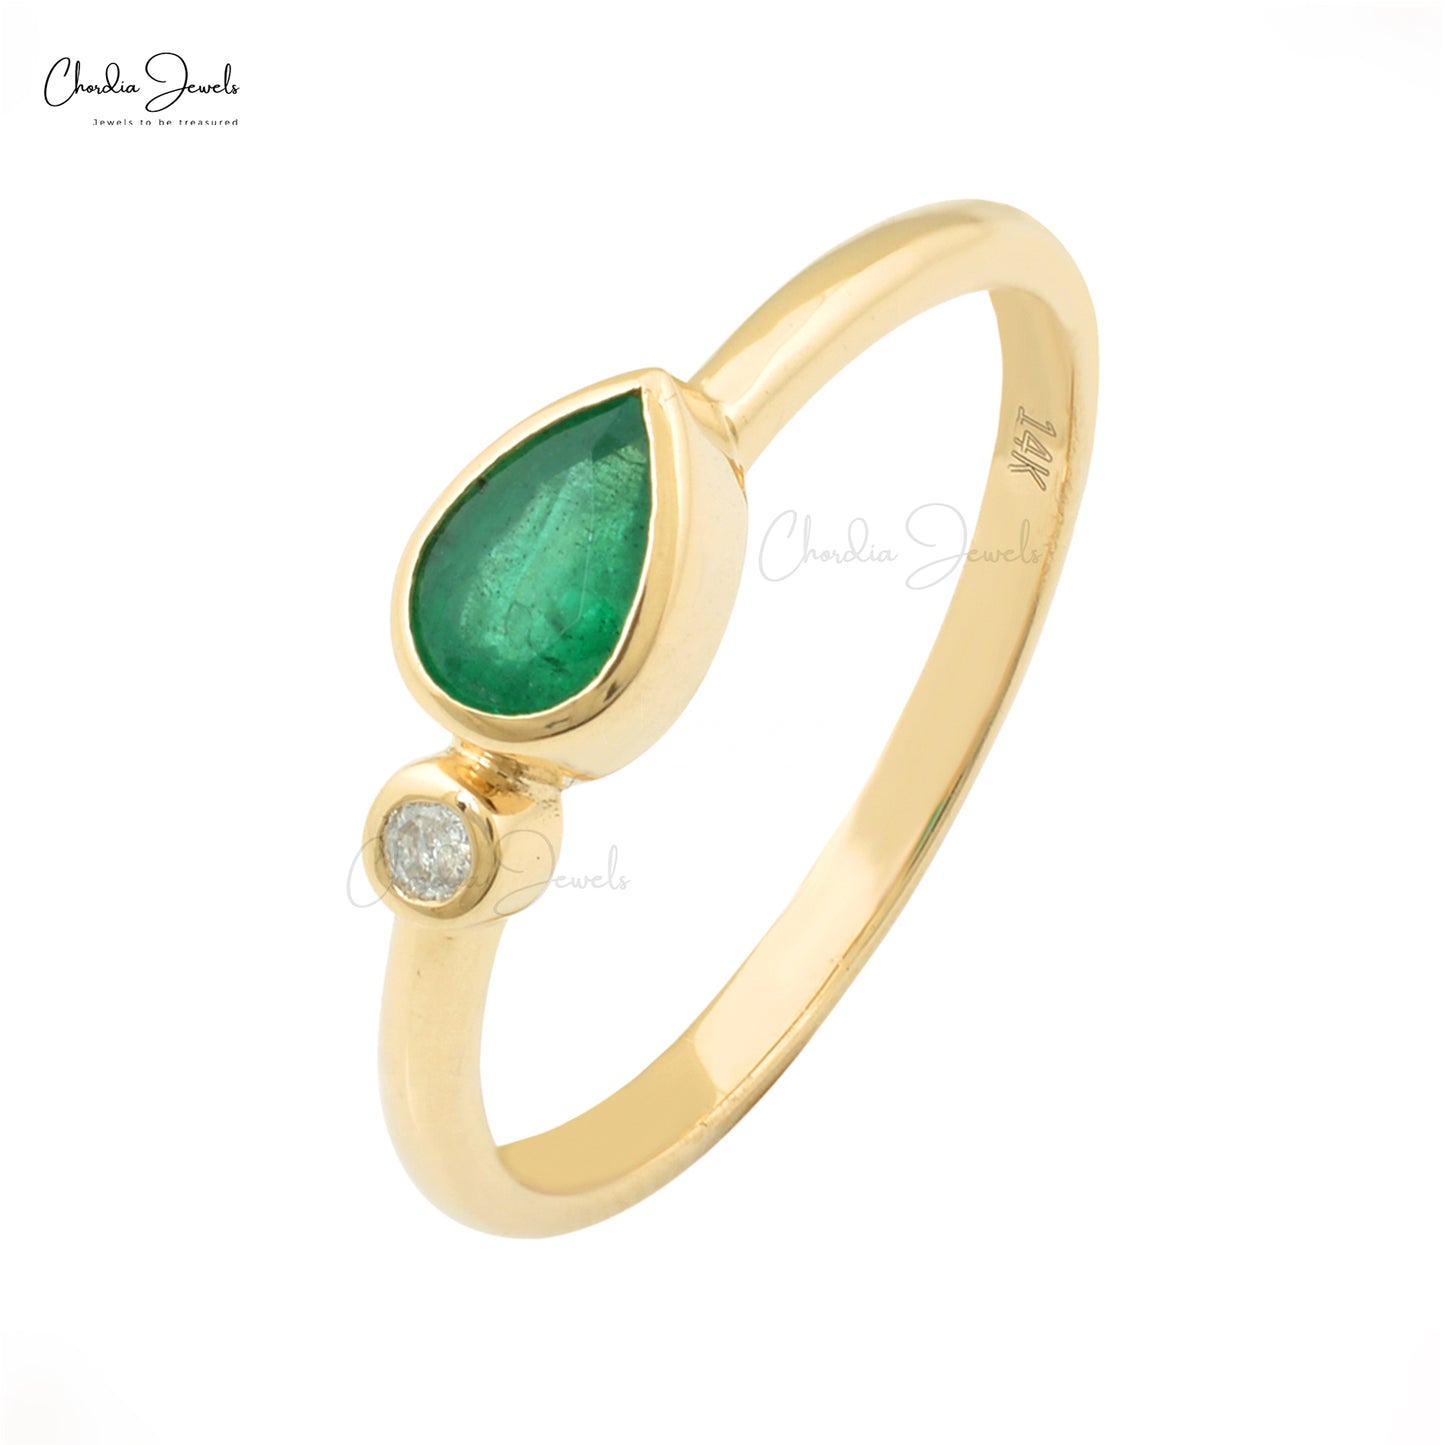 Load image into Gallery viewer, Natural Emerald 14k Solid Yellow Gold Diamond Ring 6x4mm Pear Cut Gemstone Band For May Birthstone
